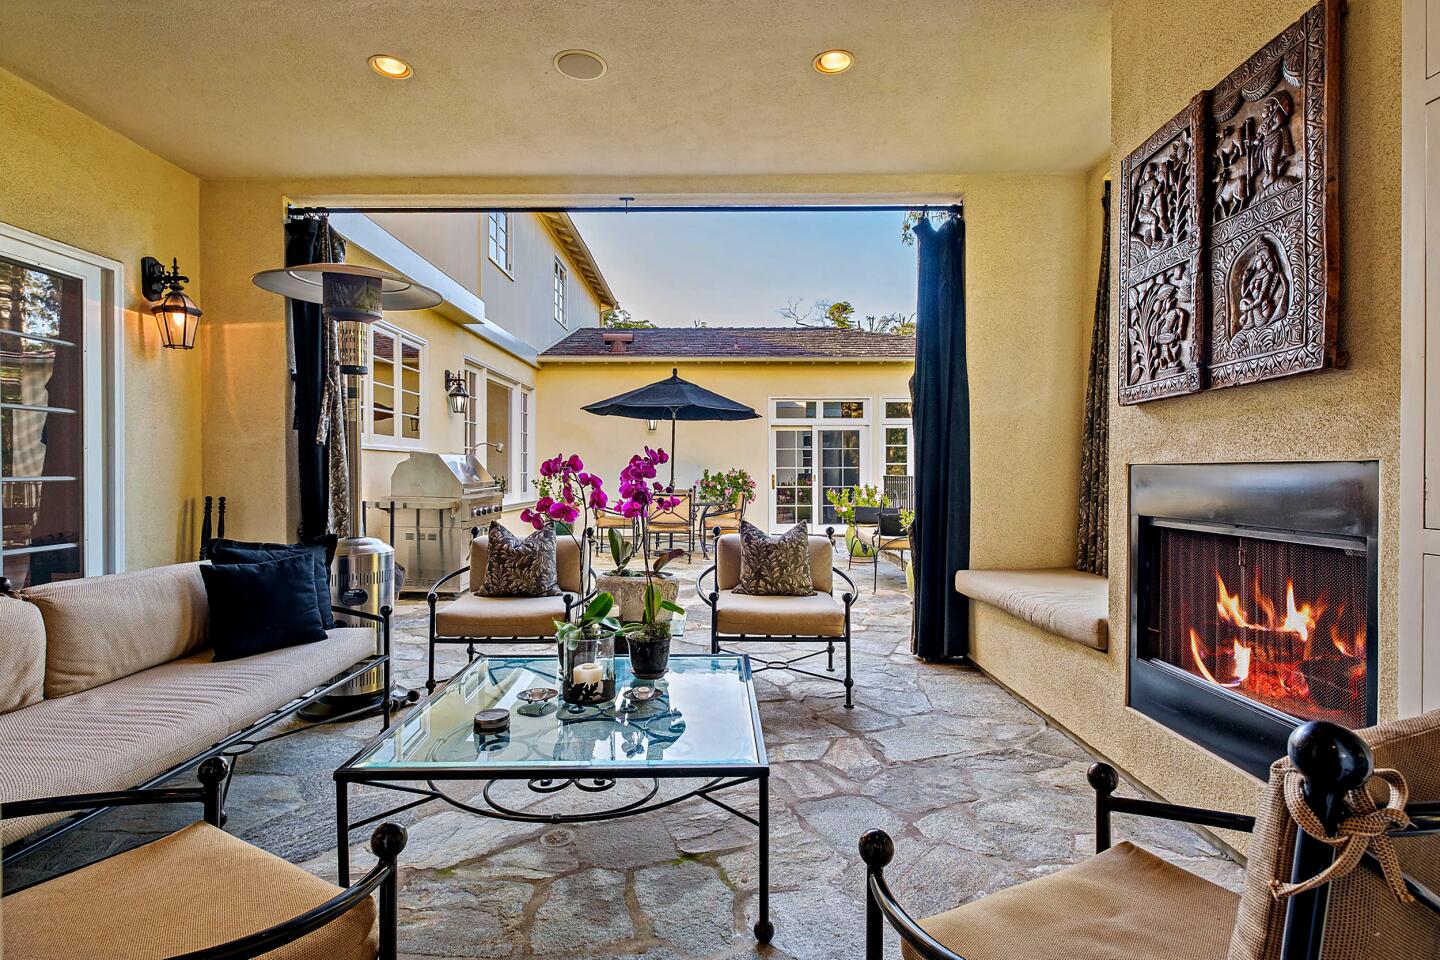 A spacious stone terrace has an outdoor dining area and covered lounge with a fireplace.